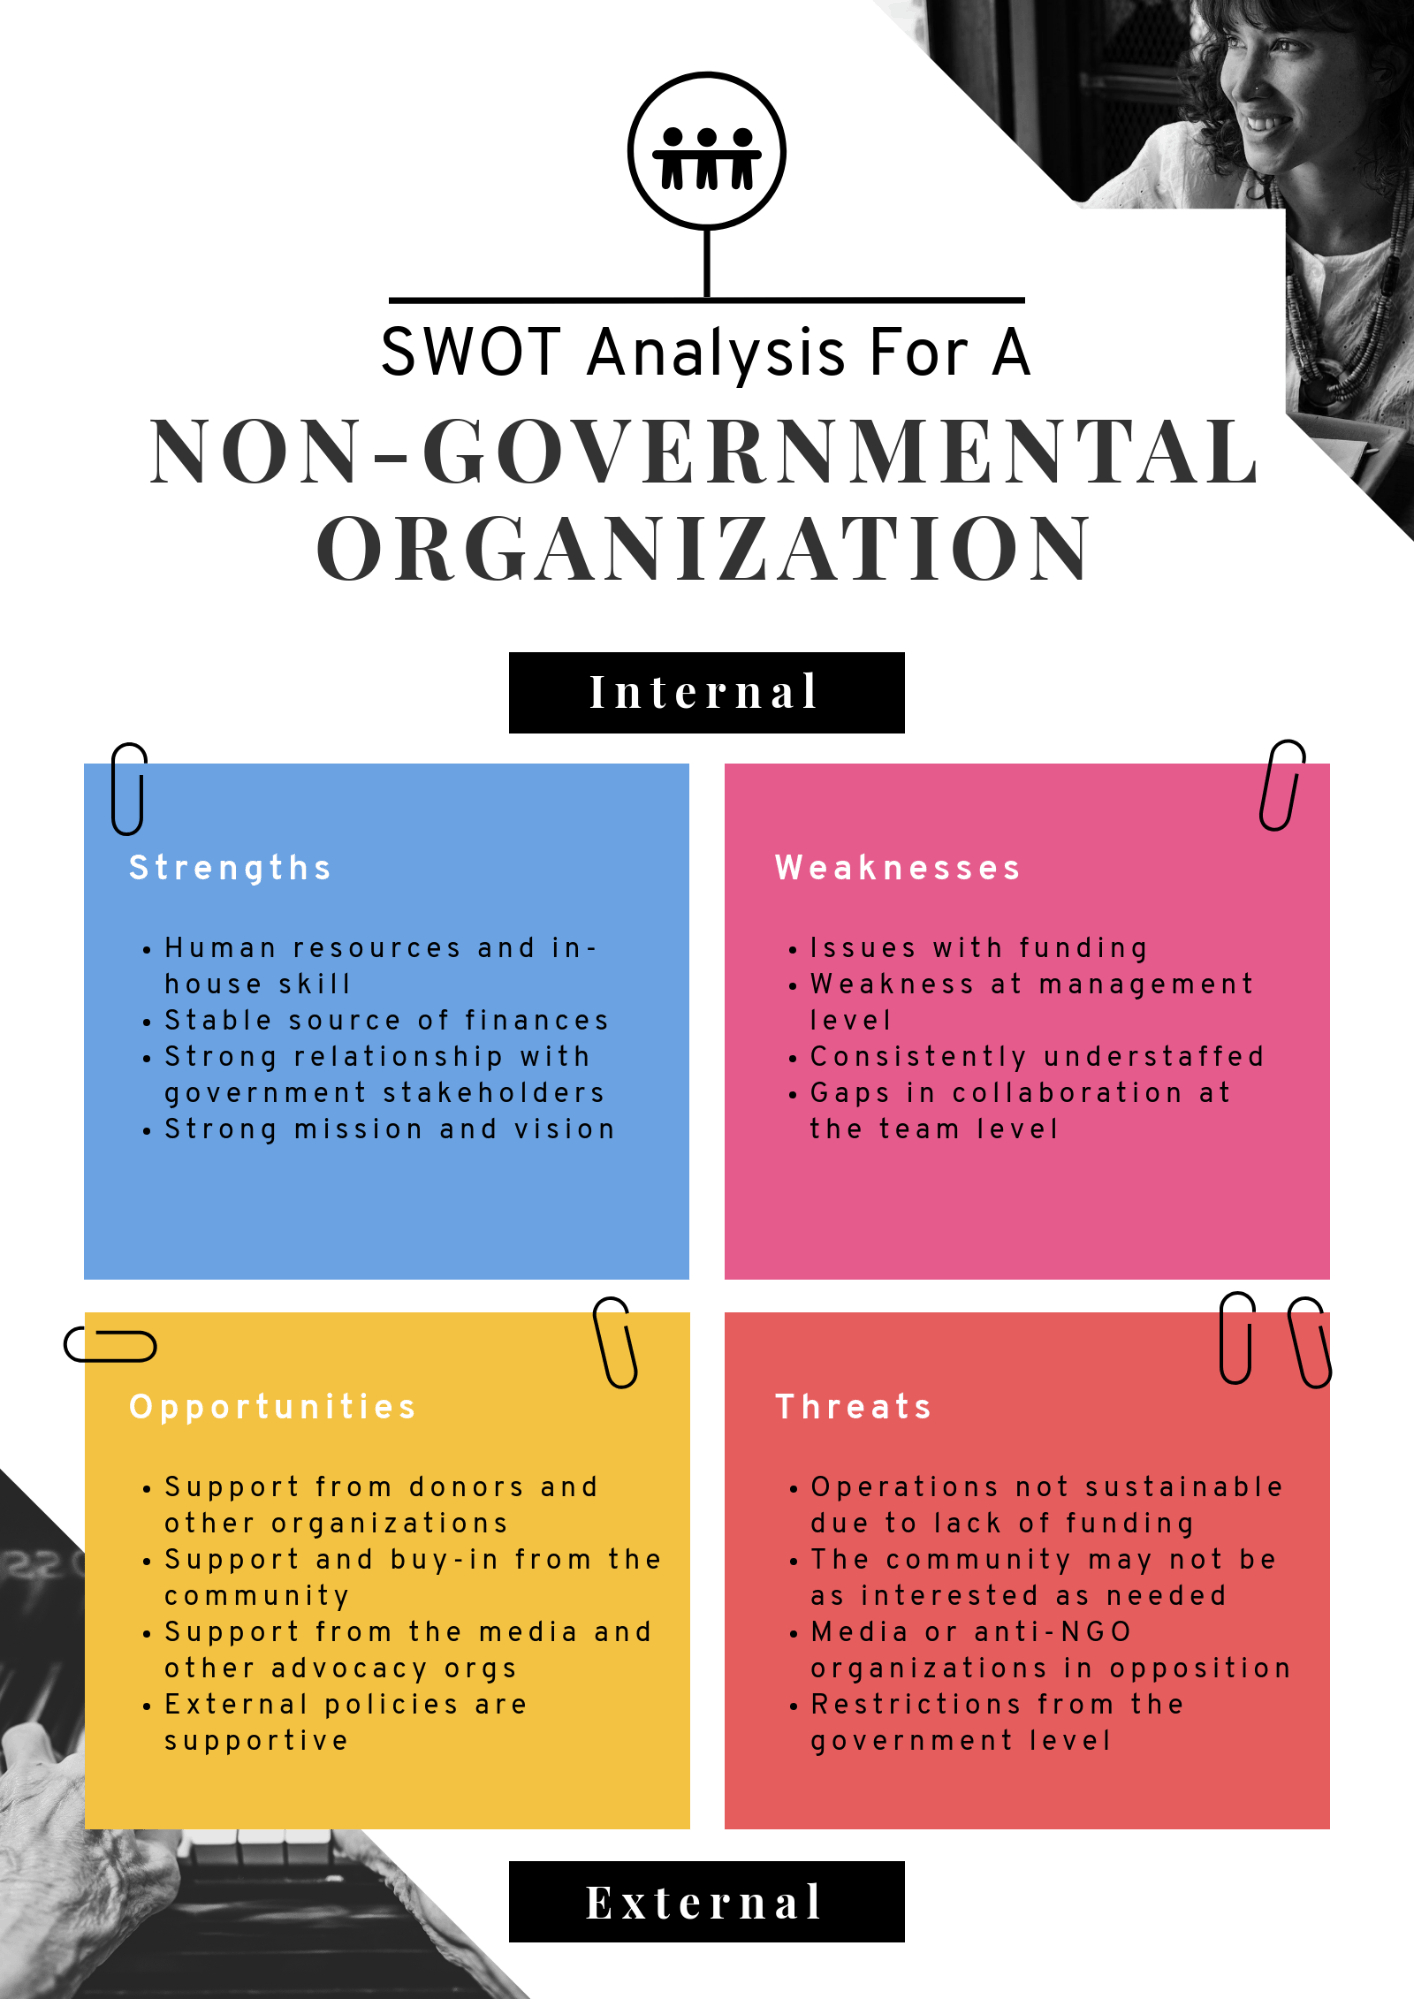 Swot Analysis: How To Structure And Visualize It | Piktochart Pertaining To Strategic Analysis Report Template